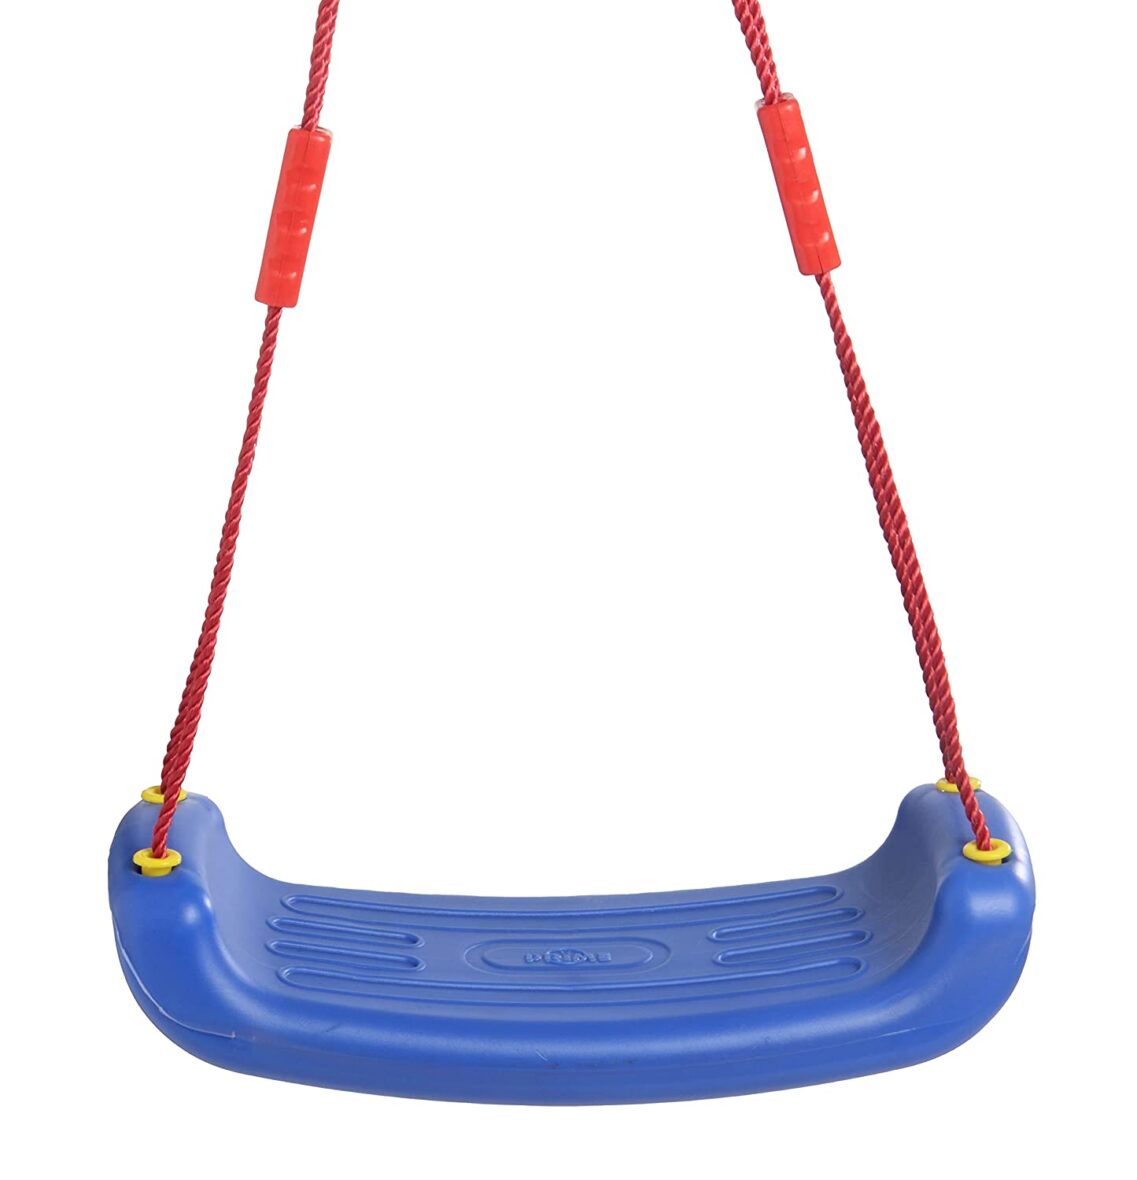 Busy Kid Swing Seat for Kids, Age 3 to 10 Years with Hand Grip (Blue)